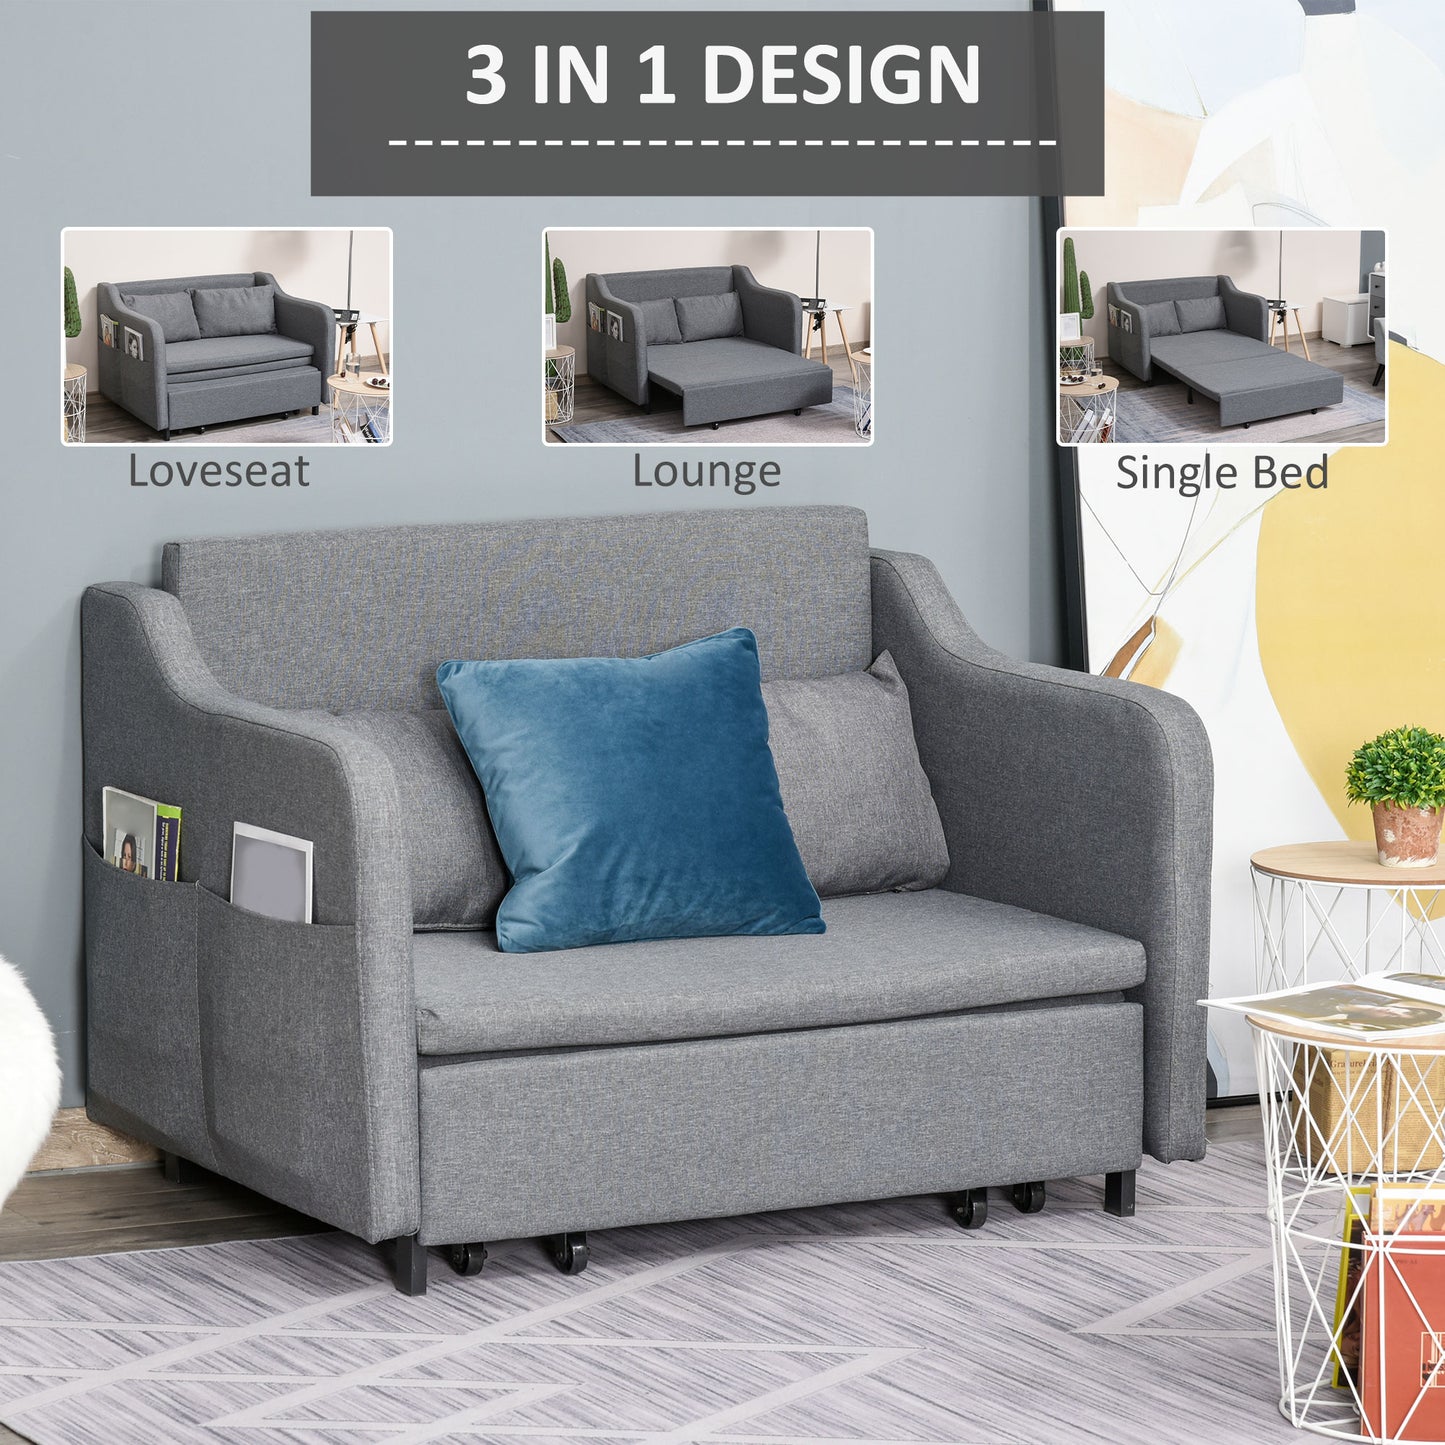 HOMCOM 2 Seater Sofa Bed, Pull Out Sofa Bed with Pillows and Side Pockets, Convertible Sleeper Couch for Living Room, Grey